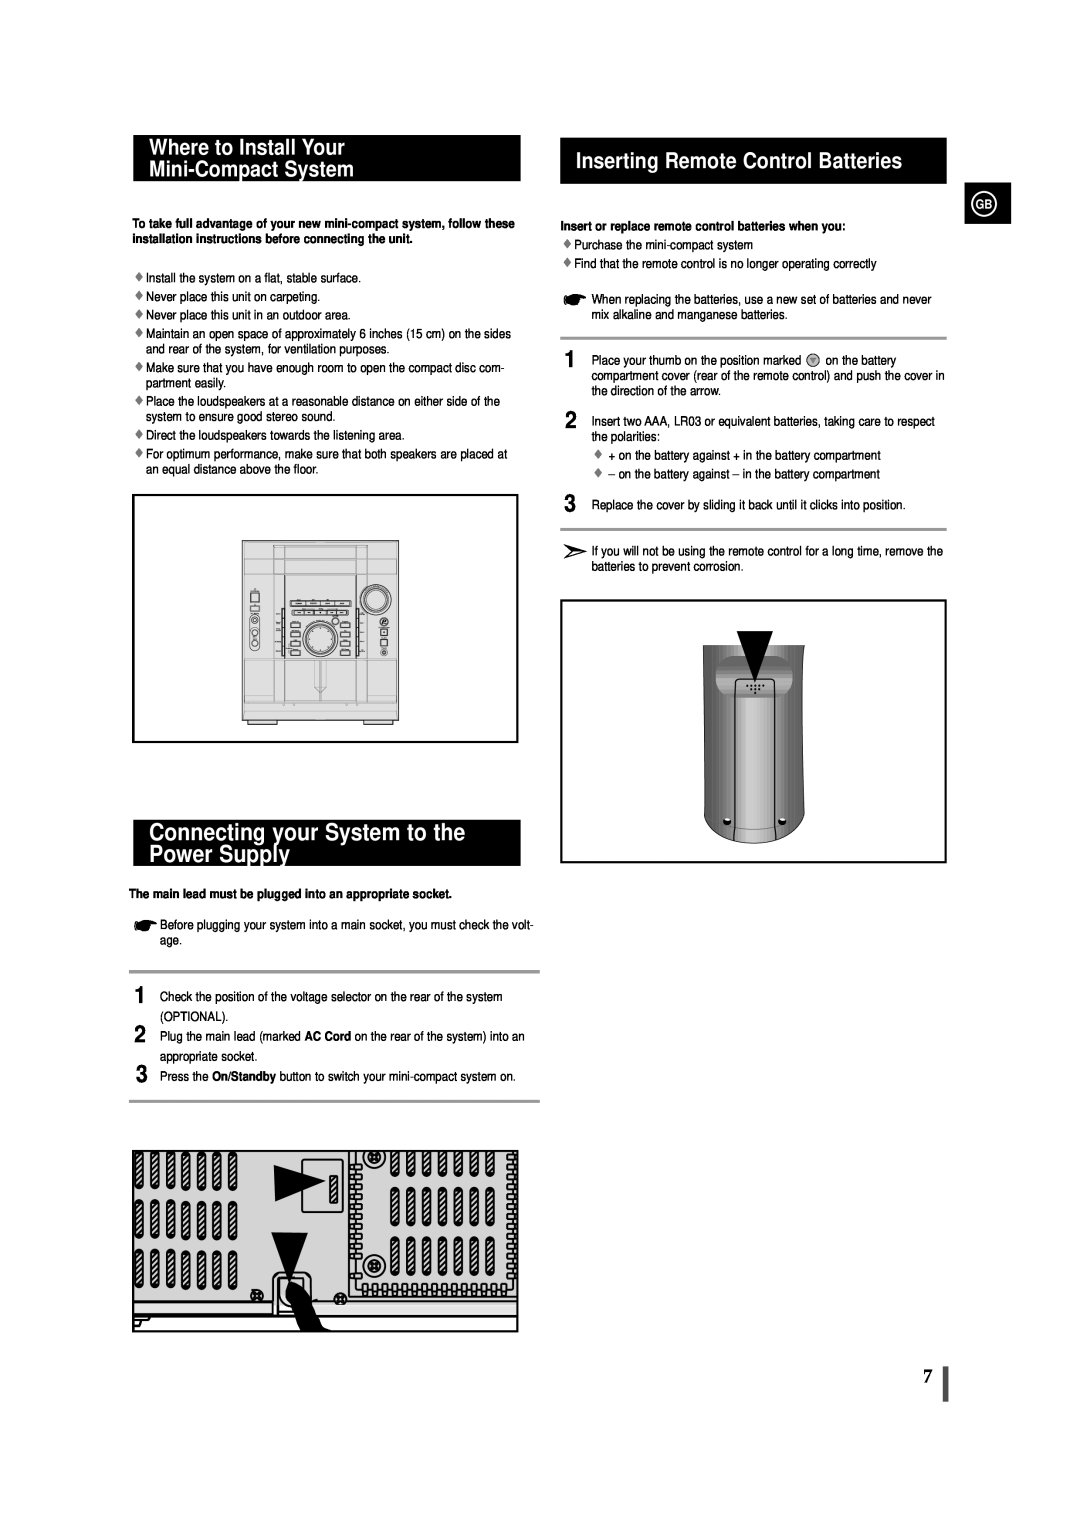 Samsung AH68-00935B, MAX-VL45 Connecting your System to the Power Supply, Where to Install Your Mini-CompactSystem 